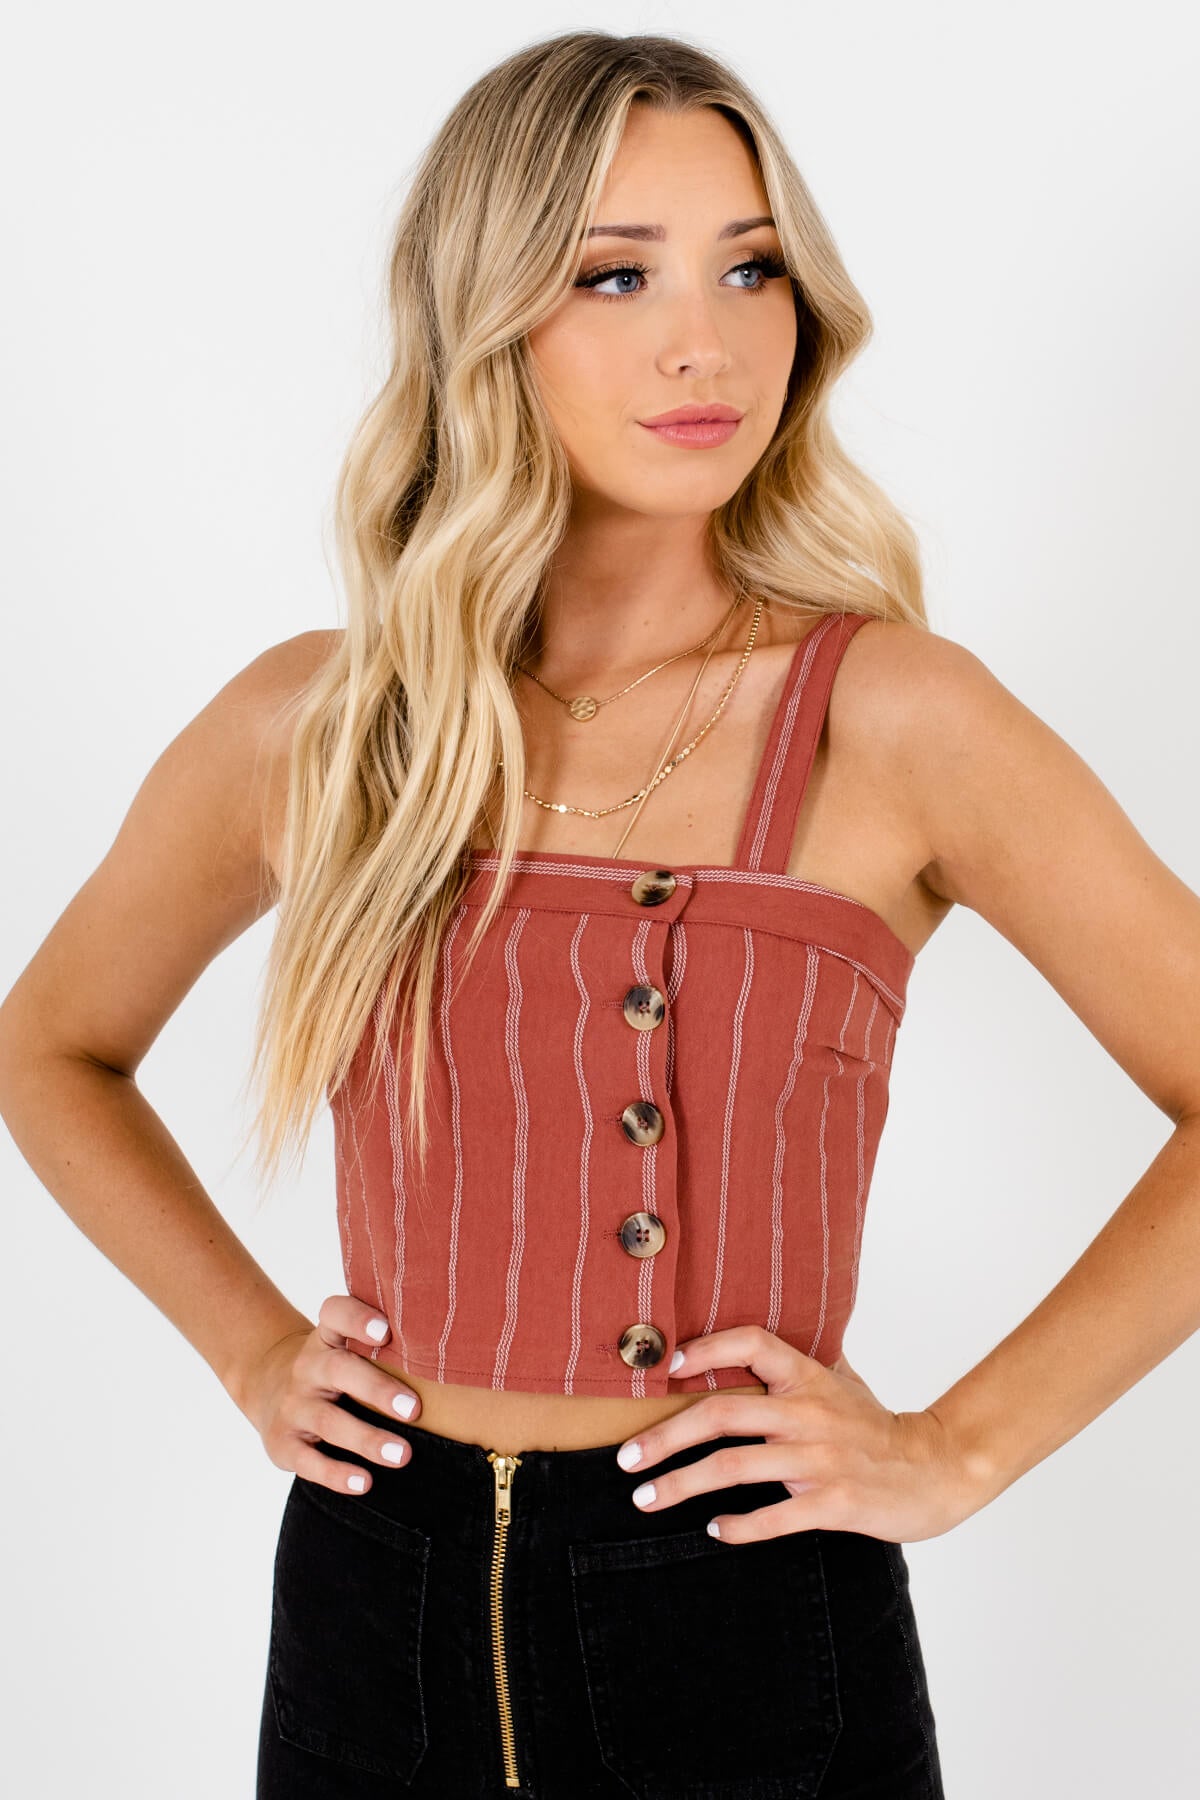 Rust Orange and White Striped Boutique Tank Tops for Women